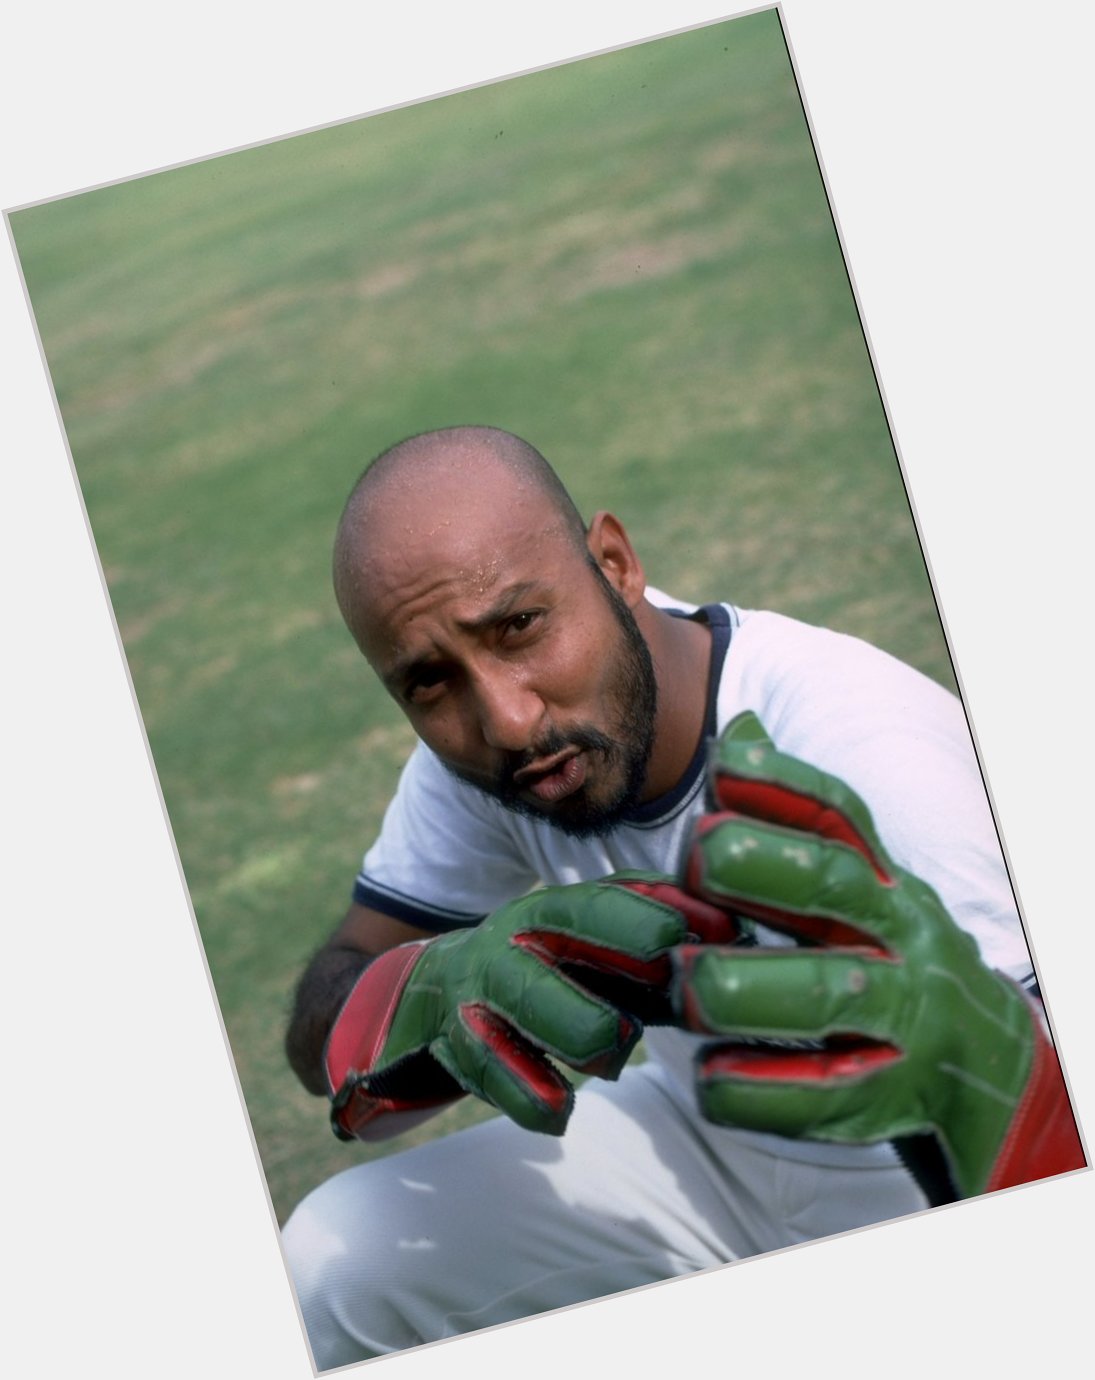 With 160 catches and 38 stumpings, only has more Test dismissals for India.

Happy Birthday Syed Kirmani! 